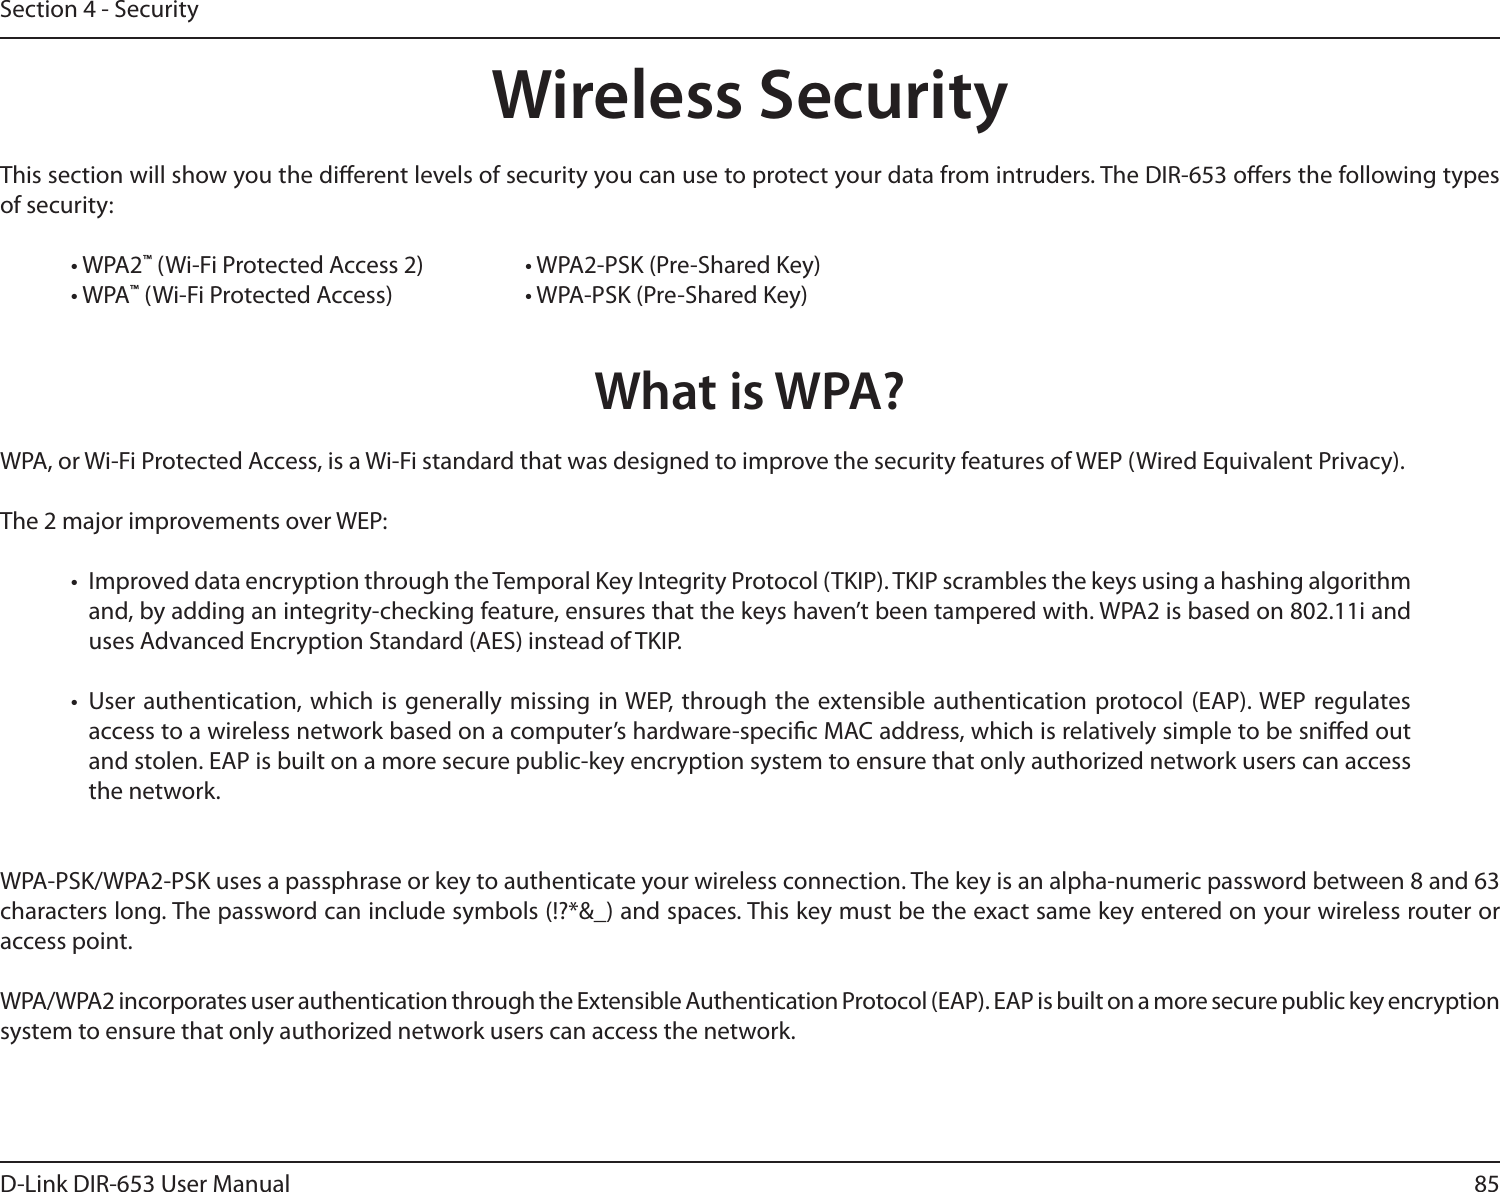 85D-Link DIR-653 User ManualSection 4 - SecurityWireless SecurityThis section will show you the dierent levels of security you can use to protect your data from intruders. The DIR-653 oers the following types of security:• WPA2™ (Wi-Fi Protected Access 2)     • WPA2-PSK (Pre-Shared Key)• WPA™ (Wi-Fi Protected Access)    • WPA-PSK (Pre-Shared Key)What is WPA?WPA, or Wi-Fi Protected Access, is a Wi-Fi standard that was designed to improve the security features of WEP (Wired Equivalent Privacy).  The 2 major improvements over WEP: •  Improved data encryption through the Temporal Key Integrity Protocol (TKIP). TKIP scrambles the keys using a hashing algorithm and, by adding an integrity-checking feature, ensures that the keys haven’t been tampered with. WPA2 is based on 802.11i and uses Advanced Encryption Standard (AES) instead of TKIP.•  User authentication, which is  generally missing  in WEP,  through the  extensible authentication protocol (EAP). WEP  regulates access to a wireless network based on a computer’s hardware-specic MAC address, which is relatively simple to be snied out and stolen. EAP is built on a more secure public-key encryption system to ensure that only authorized network users can access the network.WPA-PSK/WPA2-PSK uses a passphrase or key to authenticate your wireless connection. The key is an alpha-numeric password between 8 and 63 characters long. The password can include symbols (!?*&amp;_) and spaces. This key must be the exact same key entered on your wireless router or access point.WPA/WPA2 incorporates user authentication through the Extensible Authentication Protocol (EAP). EAP is built on a more secure public key encryption system to ensure that only authorized network users can access the network.